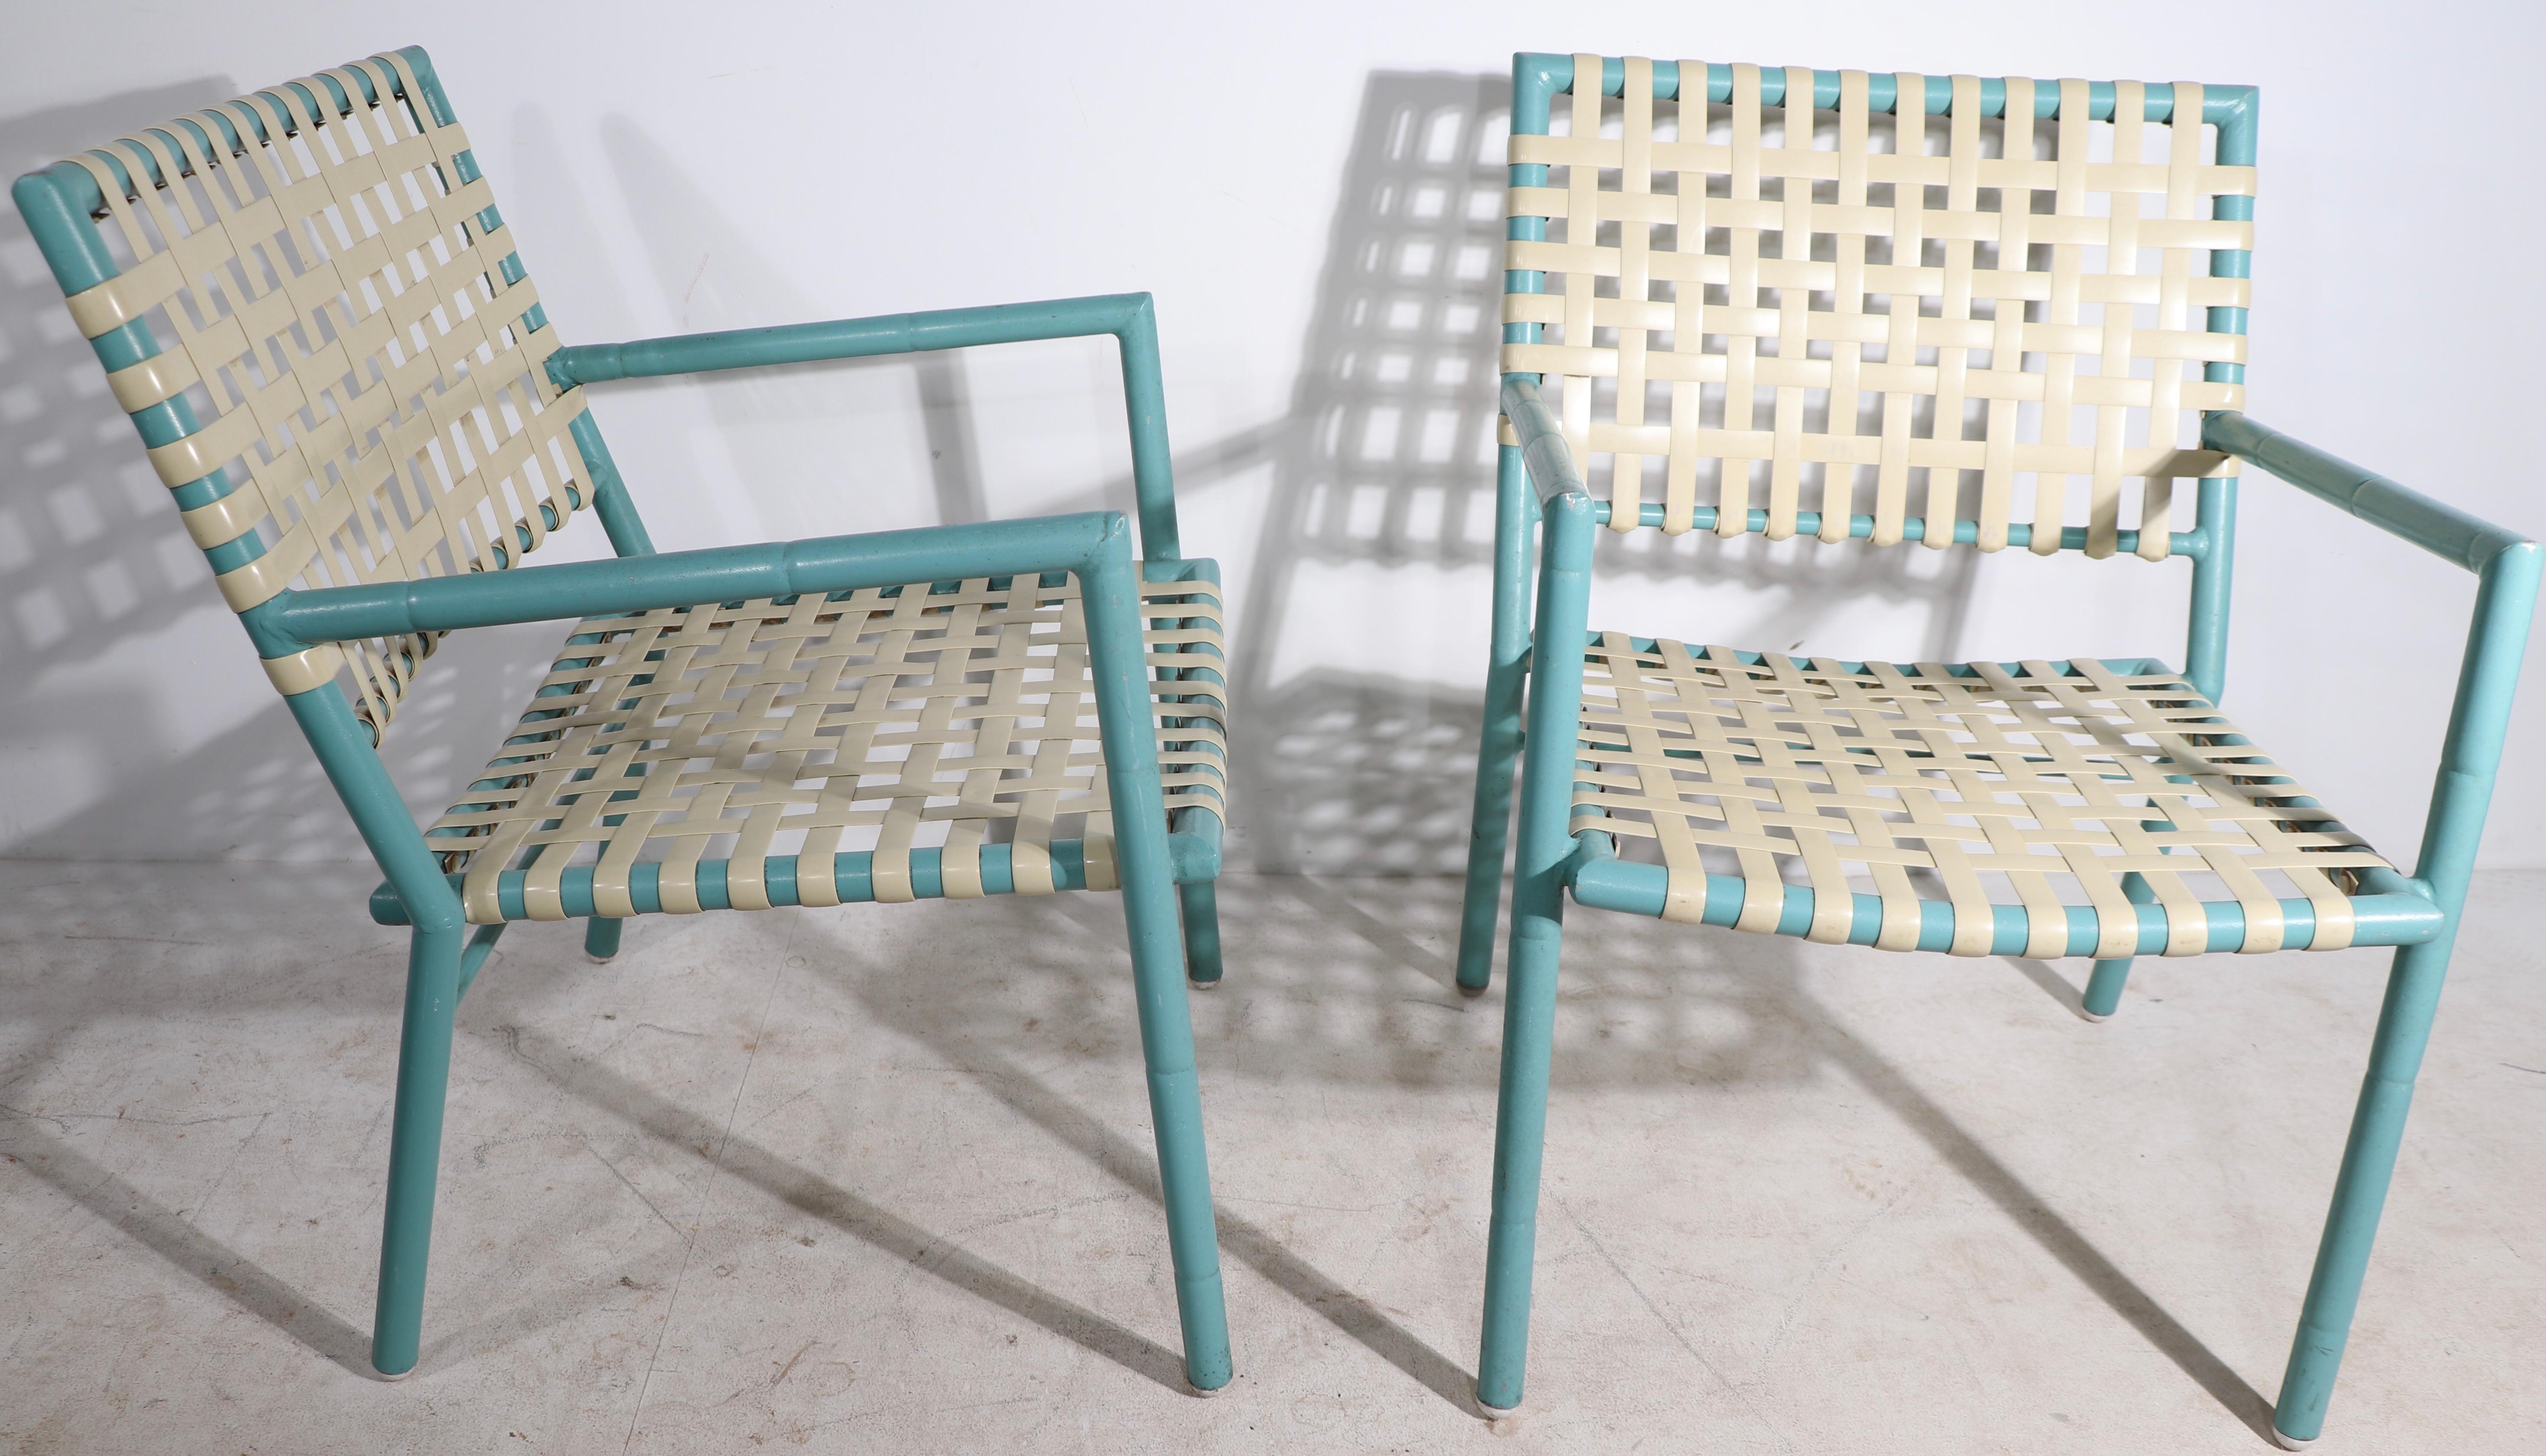 Aluminum Pr. Faux Bamboo Poolside Garden Patio Lounge Chairs by Hauser ca. 1970's For Sale